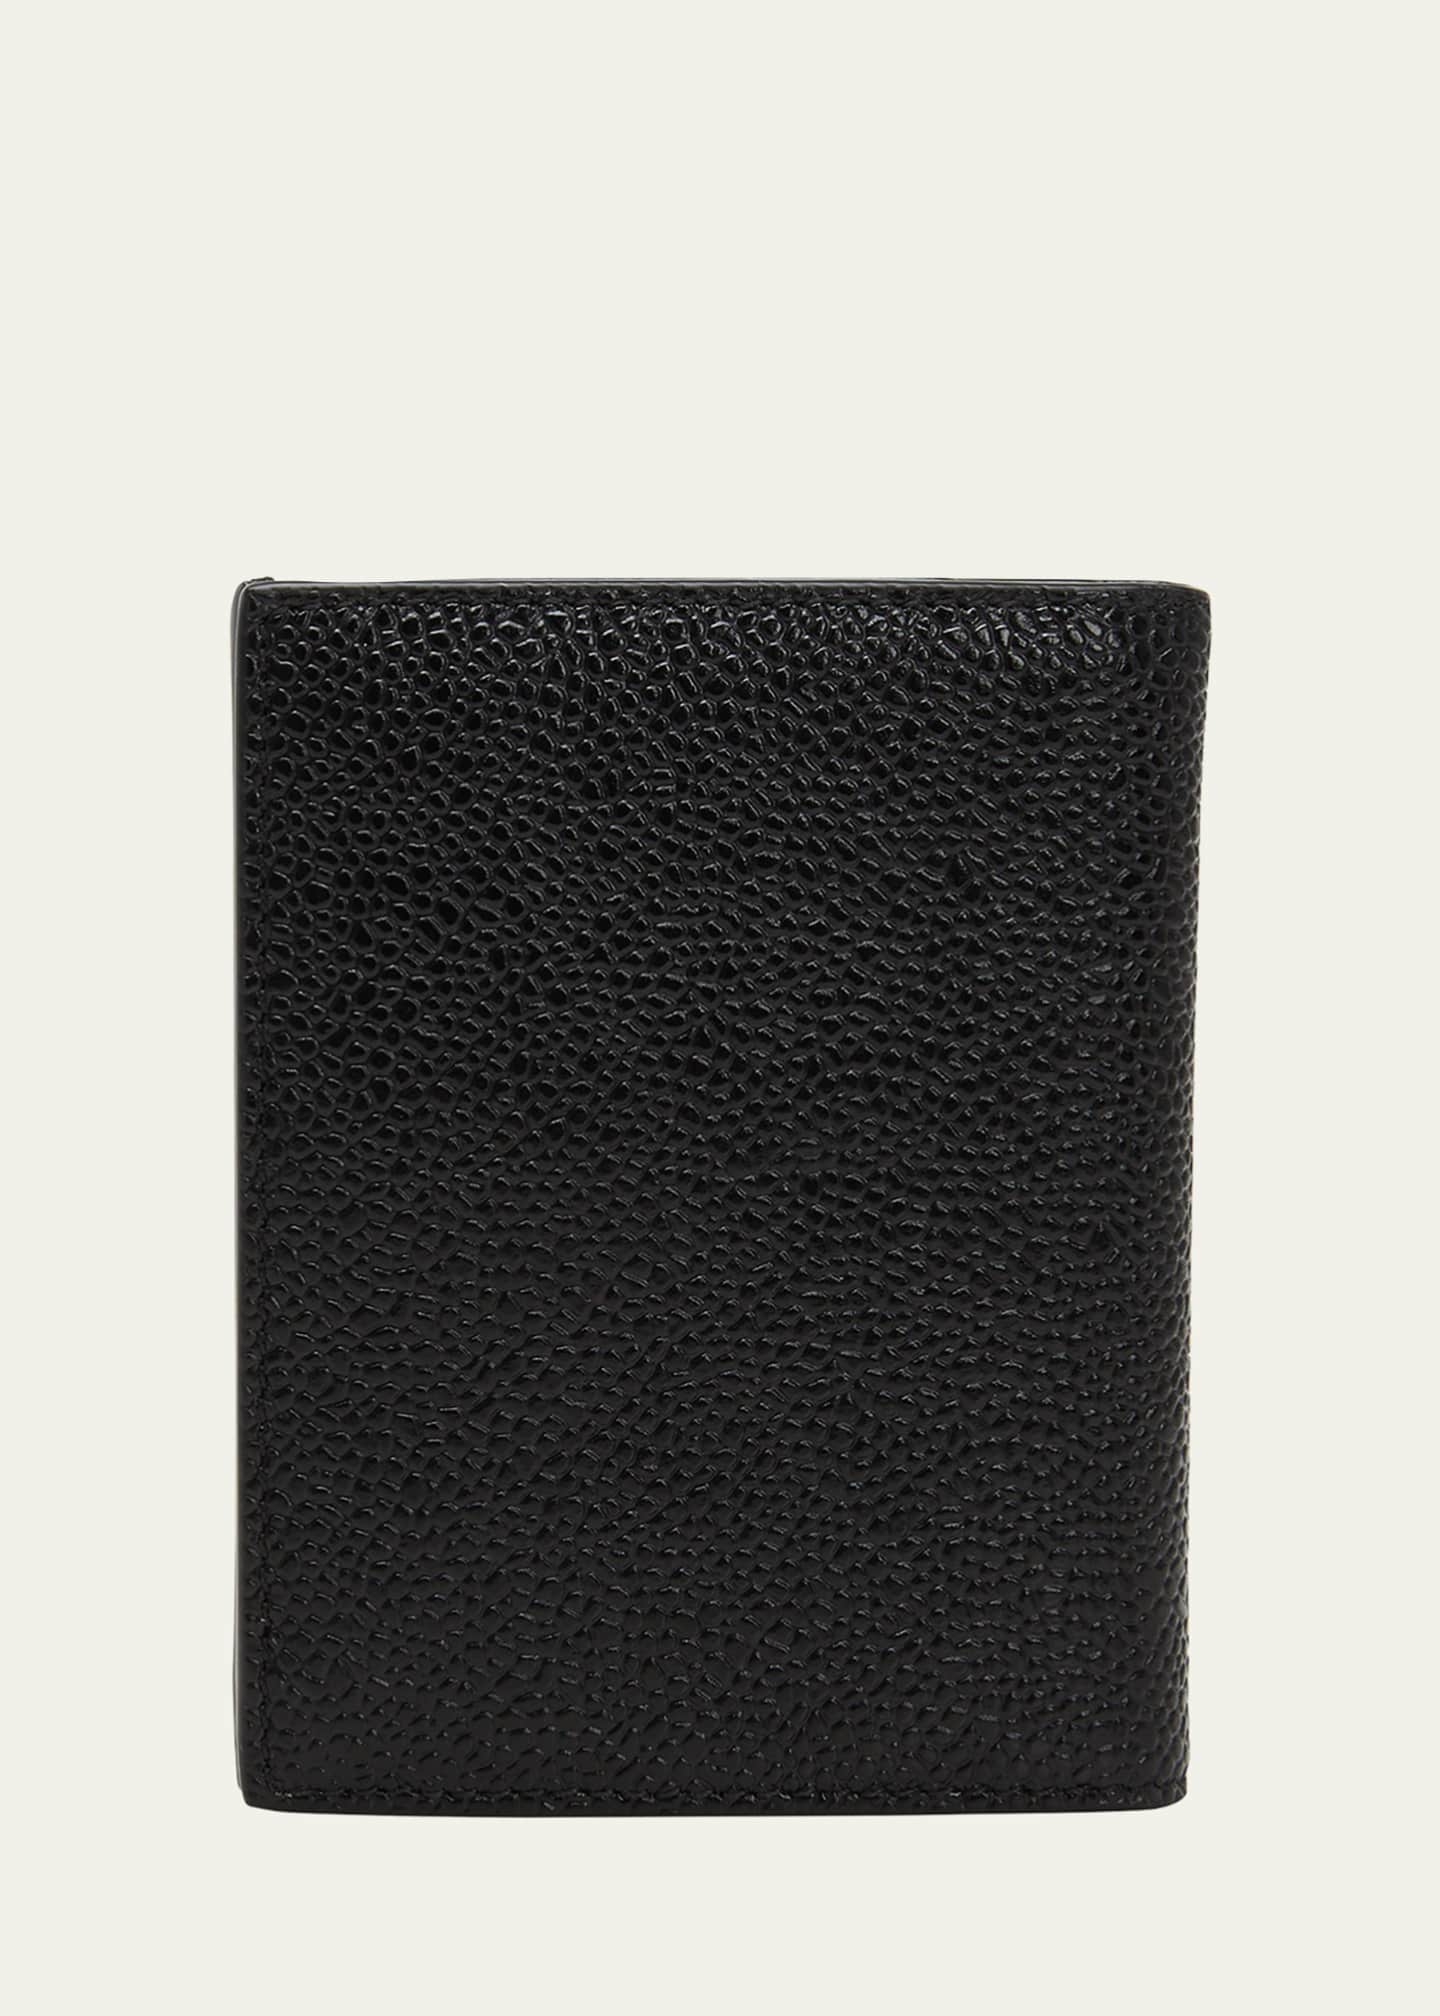 Thom Browne Men's Pebble Leather Billfold Wallet with Coin Compartment ...